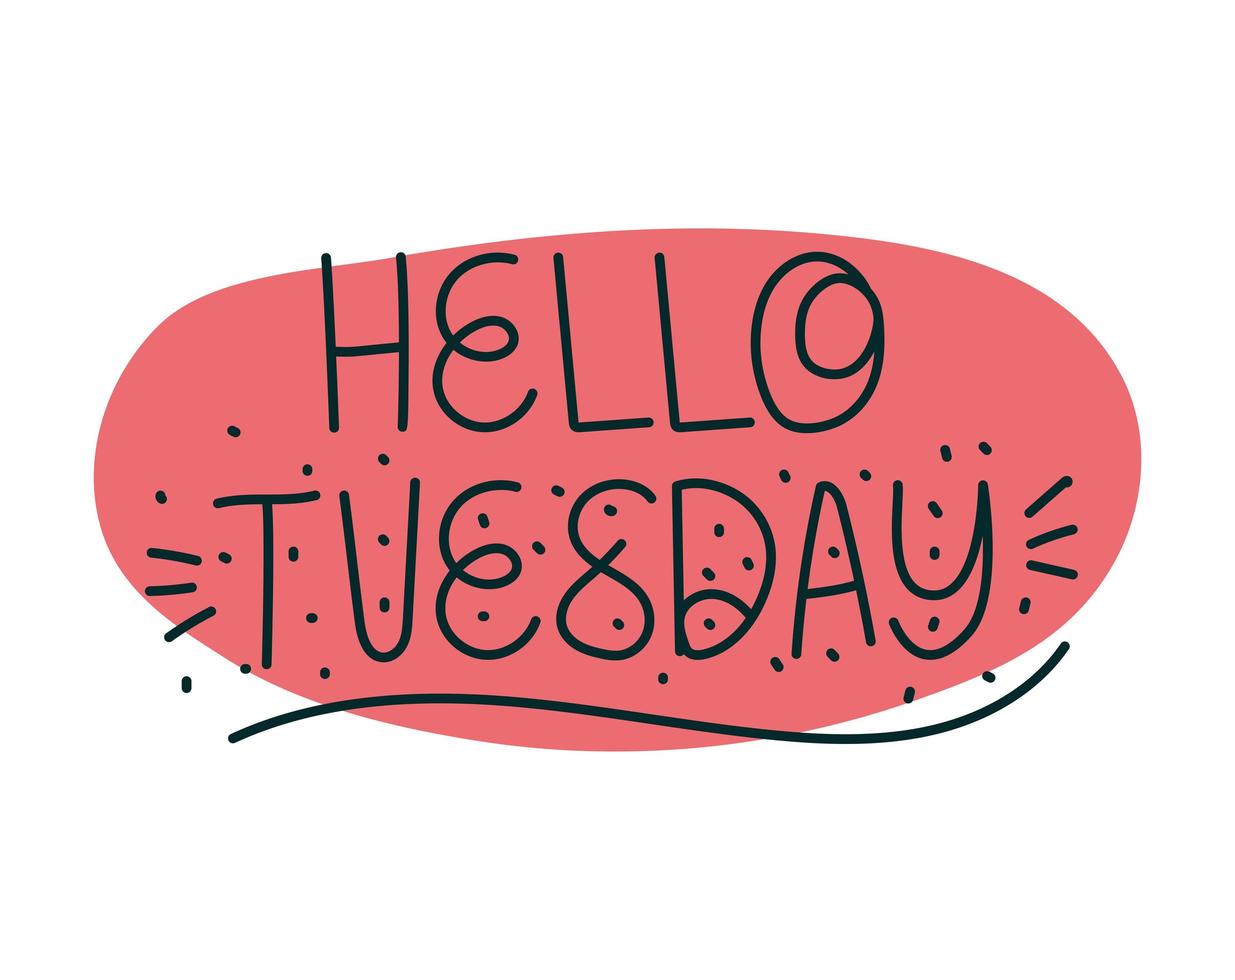 lettering of hello tuesday vector